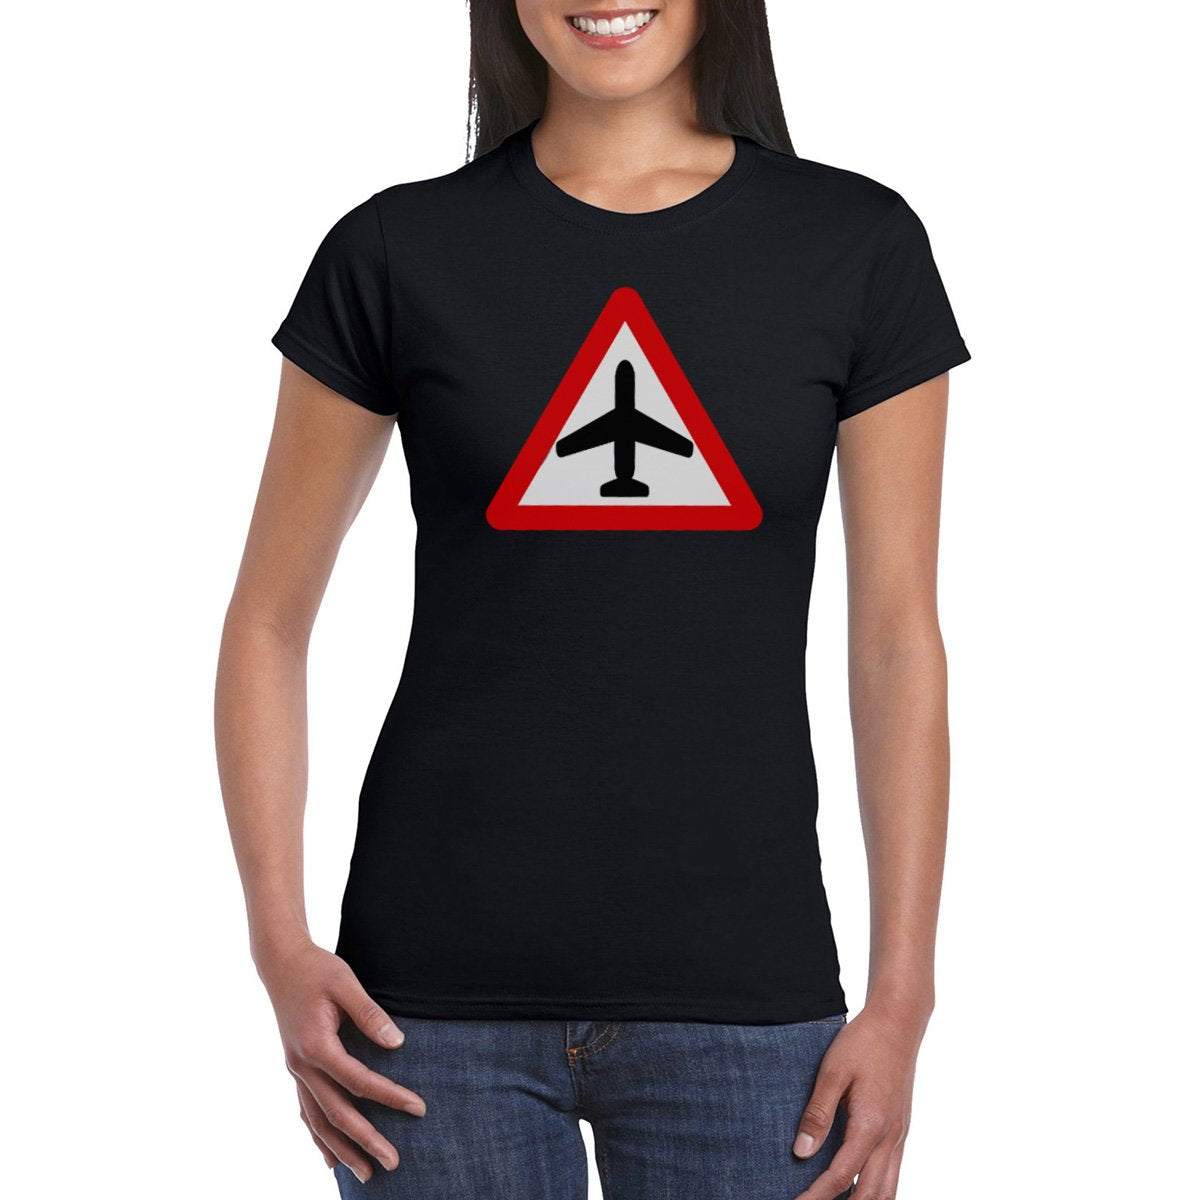 CAUTION AIRCRAFT Semi-Fitted Women's T-Shirt